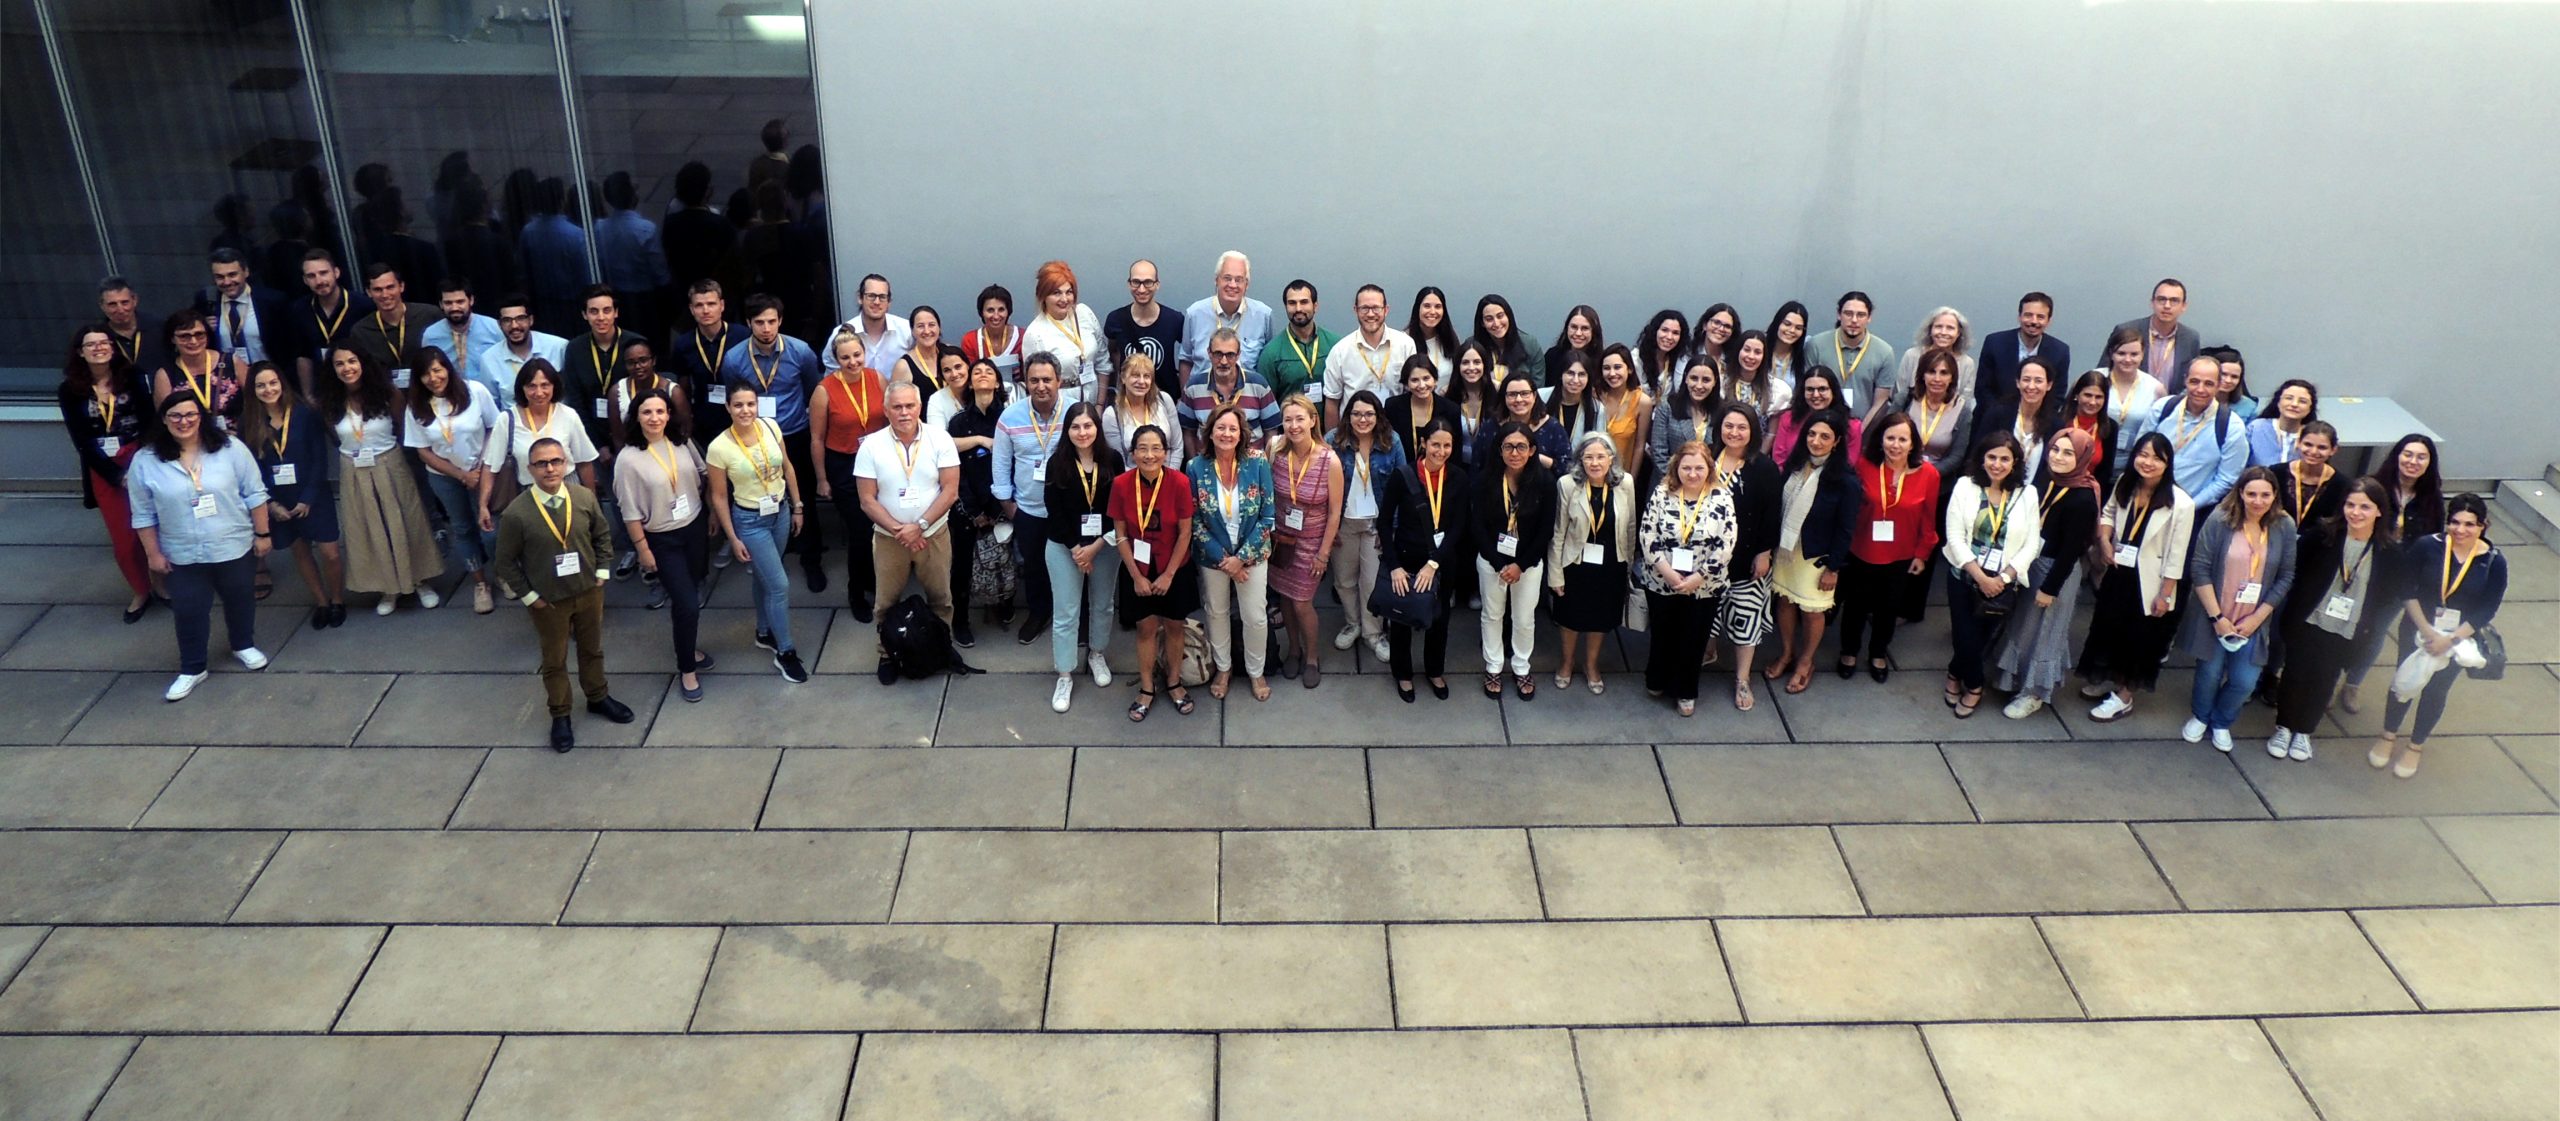 Group Photo of Participants in the 5th Grant Period Annual Conference – Coimbra, Portugal, 29th June – 1st July 2022